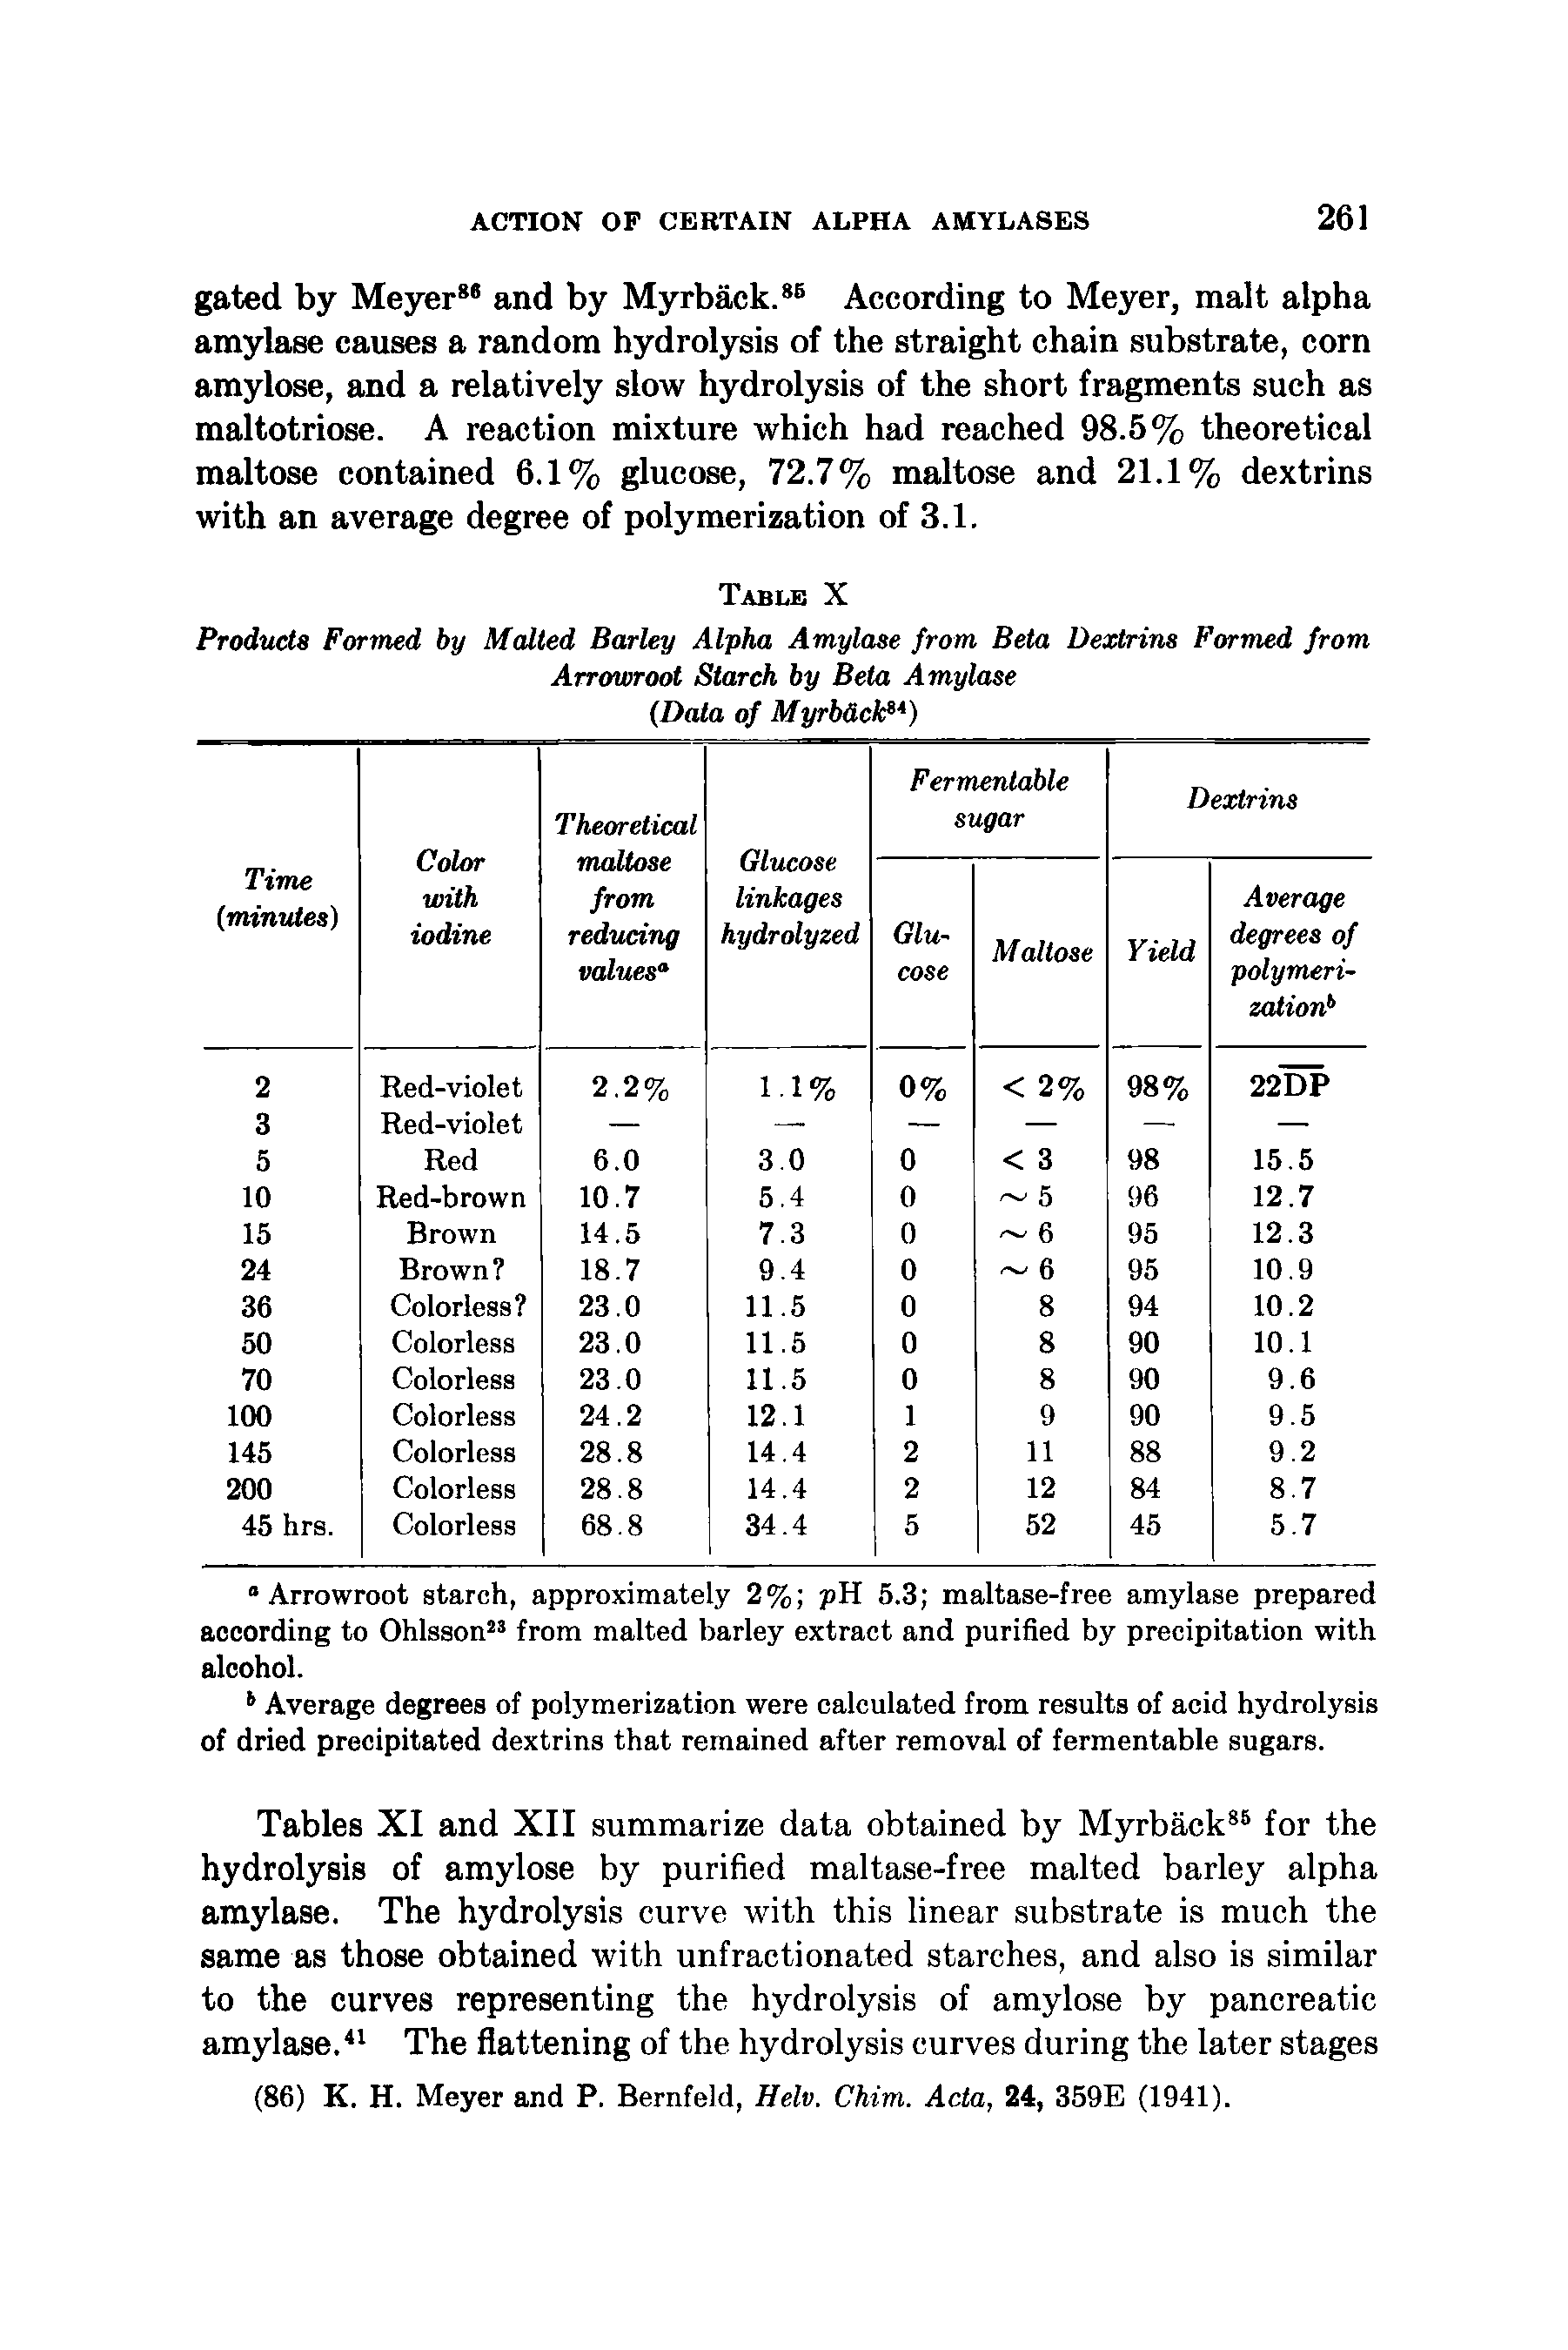 Tables XI and XII summarize data obtained by Myrback86 for the hydrolysis of amylose by purified maltase-free malted barley alpha amylase. The hydrolysis curve with this linear substrate is much the same as those obtained with unfractionated starches, and also is similar to the curves representing the hydrolysis of amylose by pancreatic amylase.41 The flattening of the hydrolysis curves during the later stages (86) K. H. Meyer and P. Bernfeld, Helv. Chim. Acta, 24, 359E (1941).